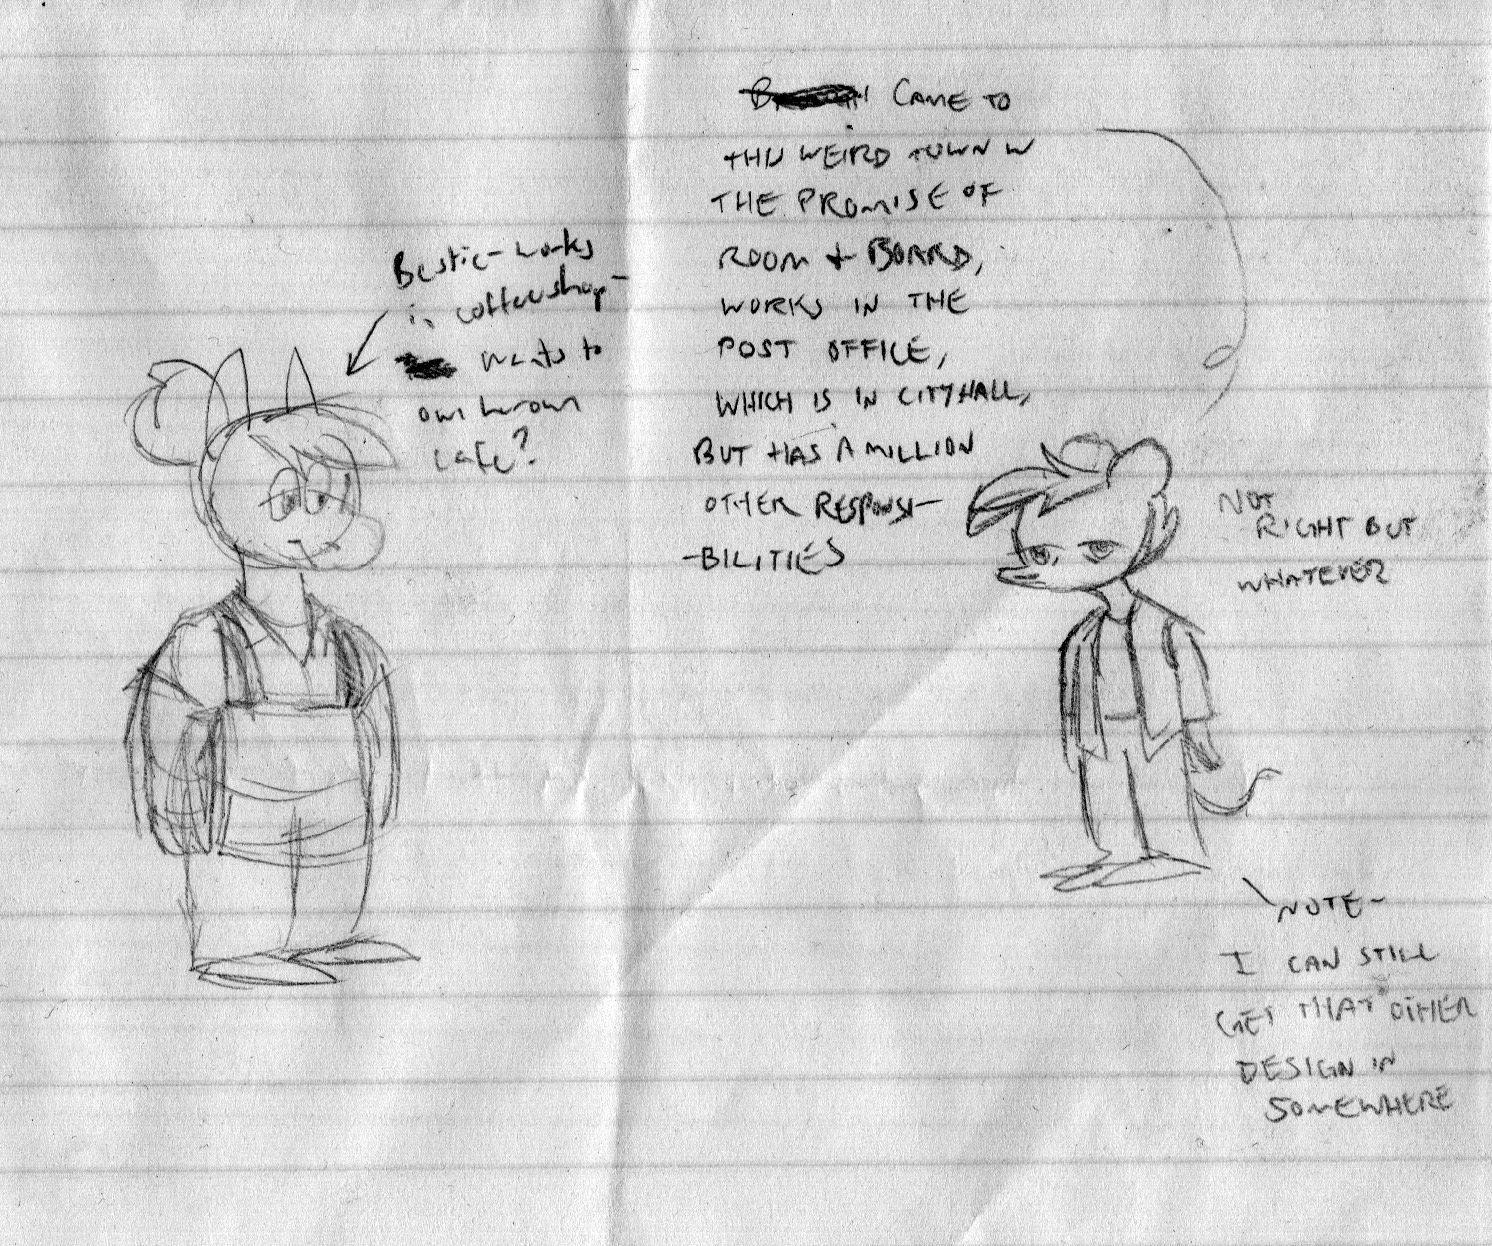 a scan of a piece of notebook paper with early drawings of summer and autumn. text by 'summer': Bestie - works in coffeeshop - wants to own her own cafe? text by 'Autumn': Came to this weird town w the promise of room + board; works in the post office, which is in city hall, but has a million other responsibilites. Not right but whatever. Note - I can still get that other design in somewhere